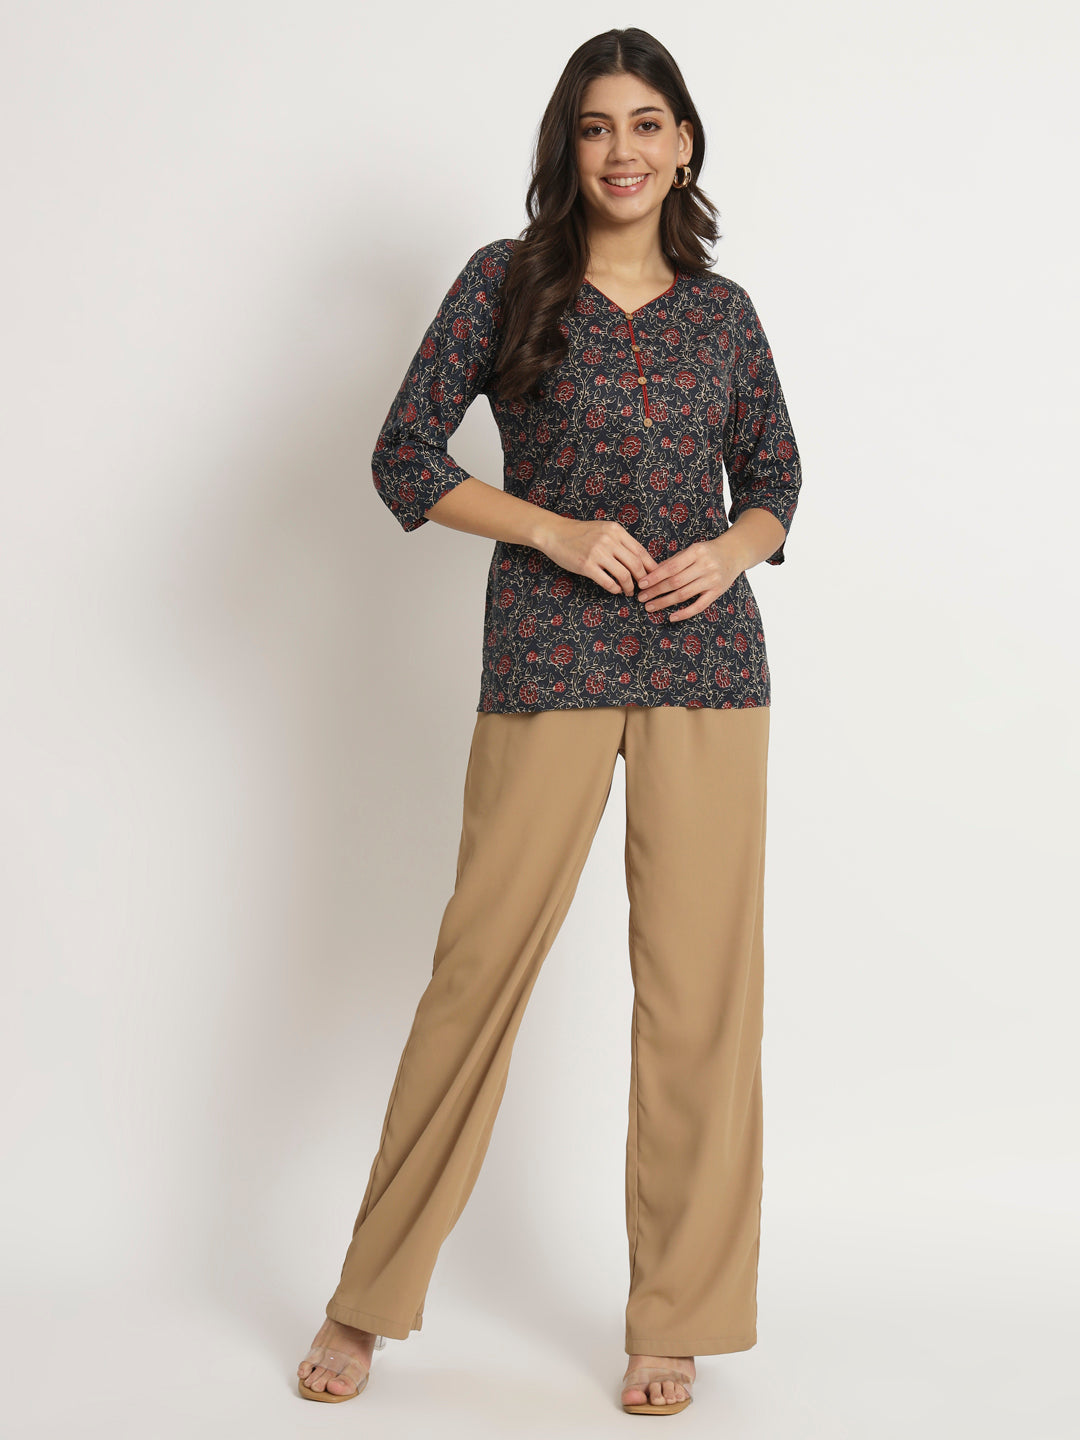 5 Sassy Kurti and Palazzo Combinations To Try Out!